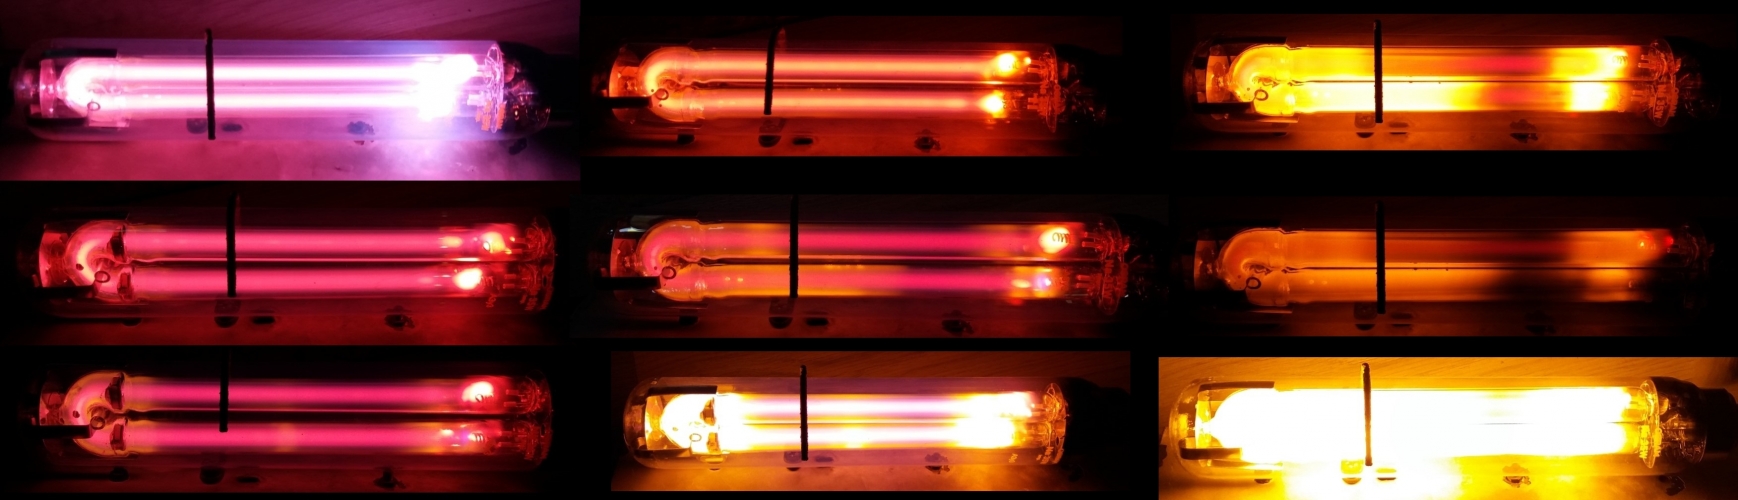 Osram SOX lamps from 1992 getting run up for the first time
A collage of some nice colours they produced when getting run up for the first time.
